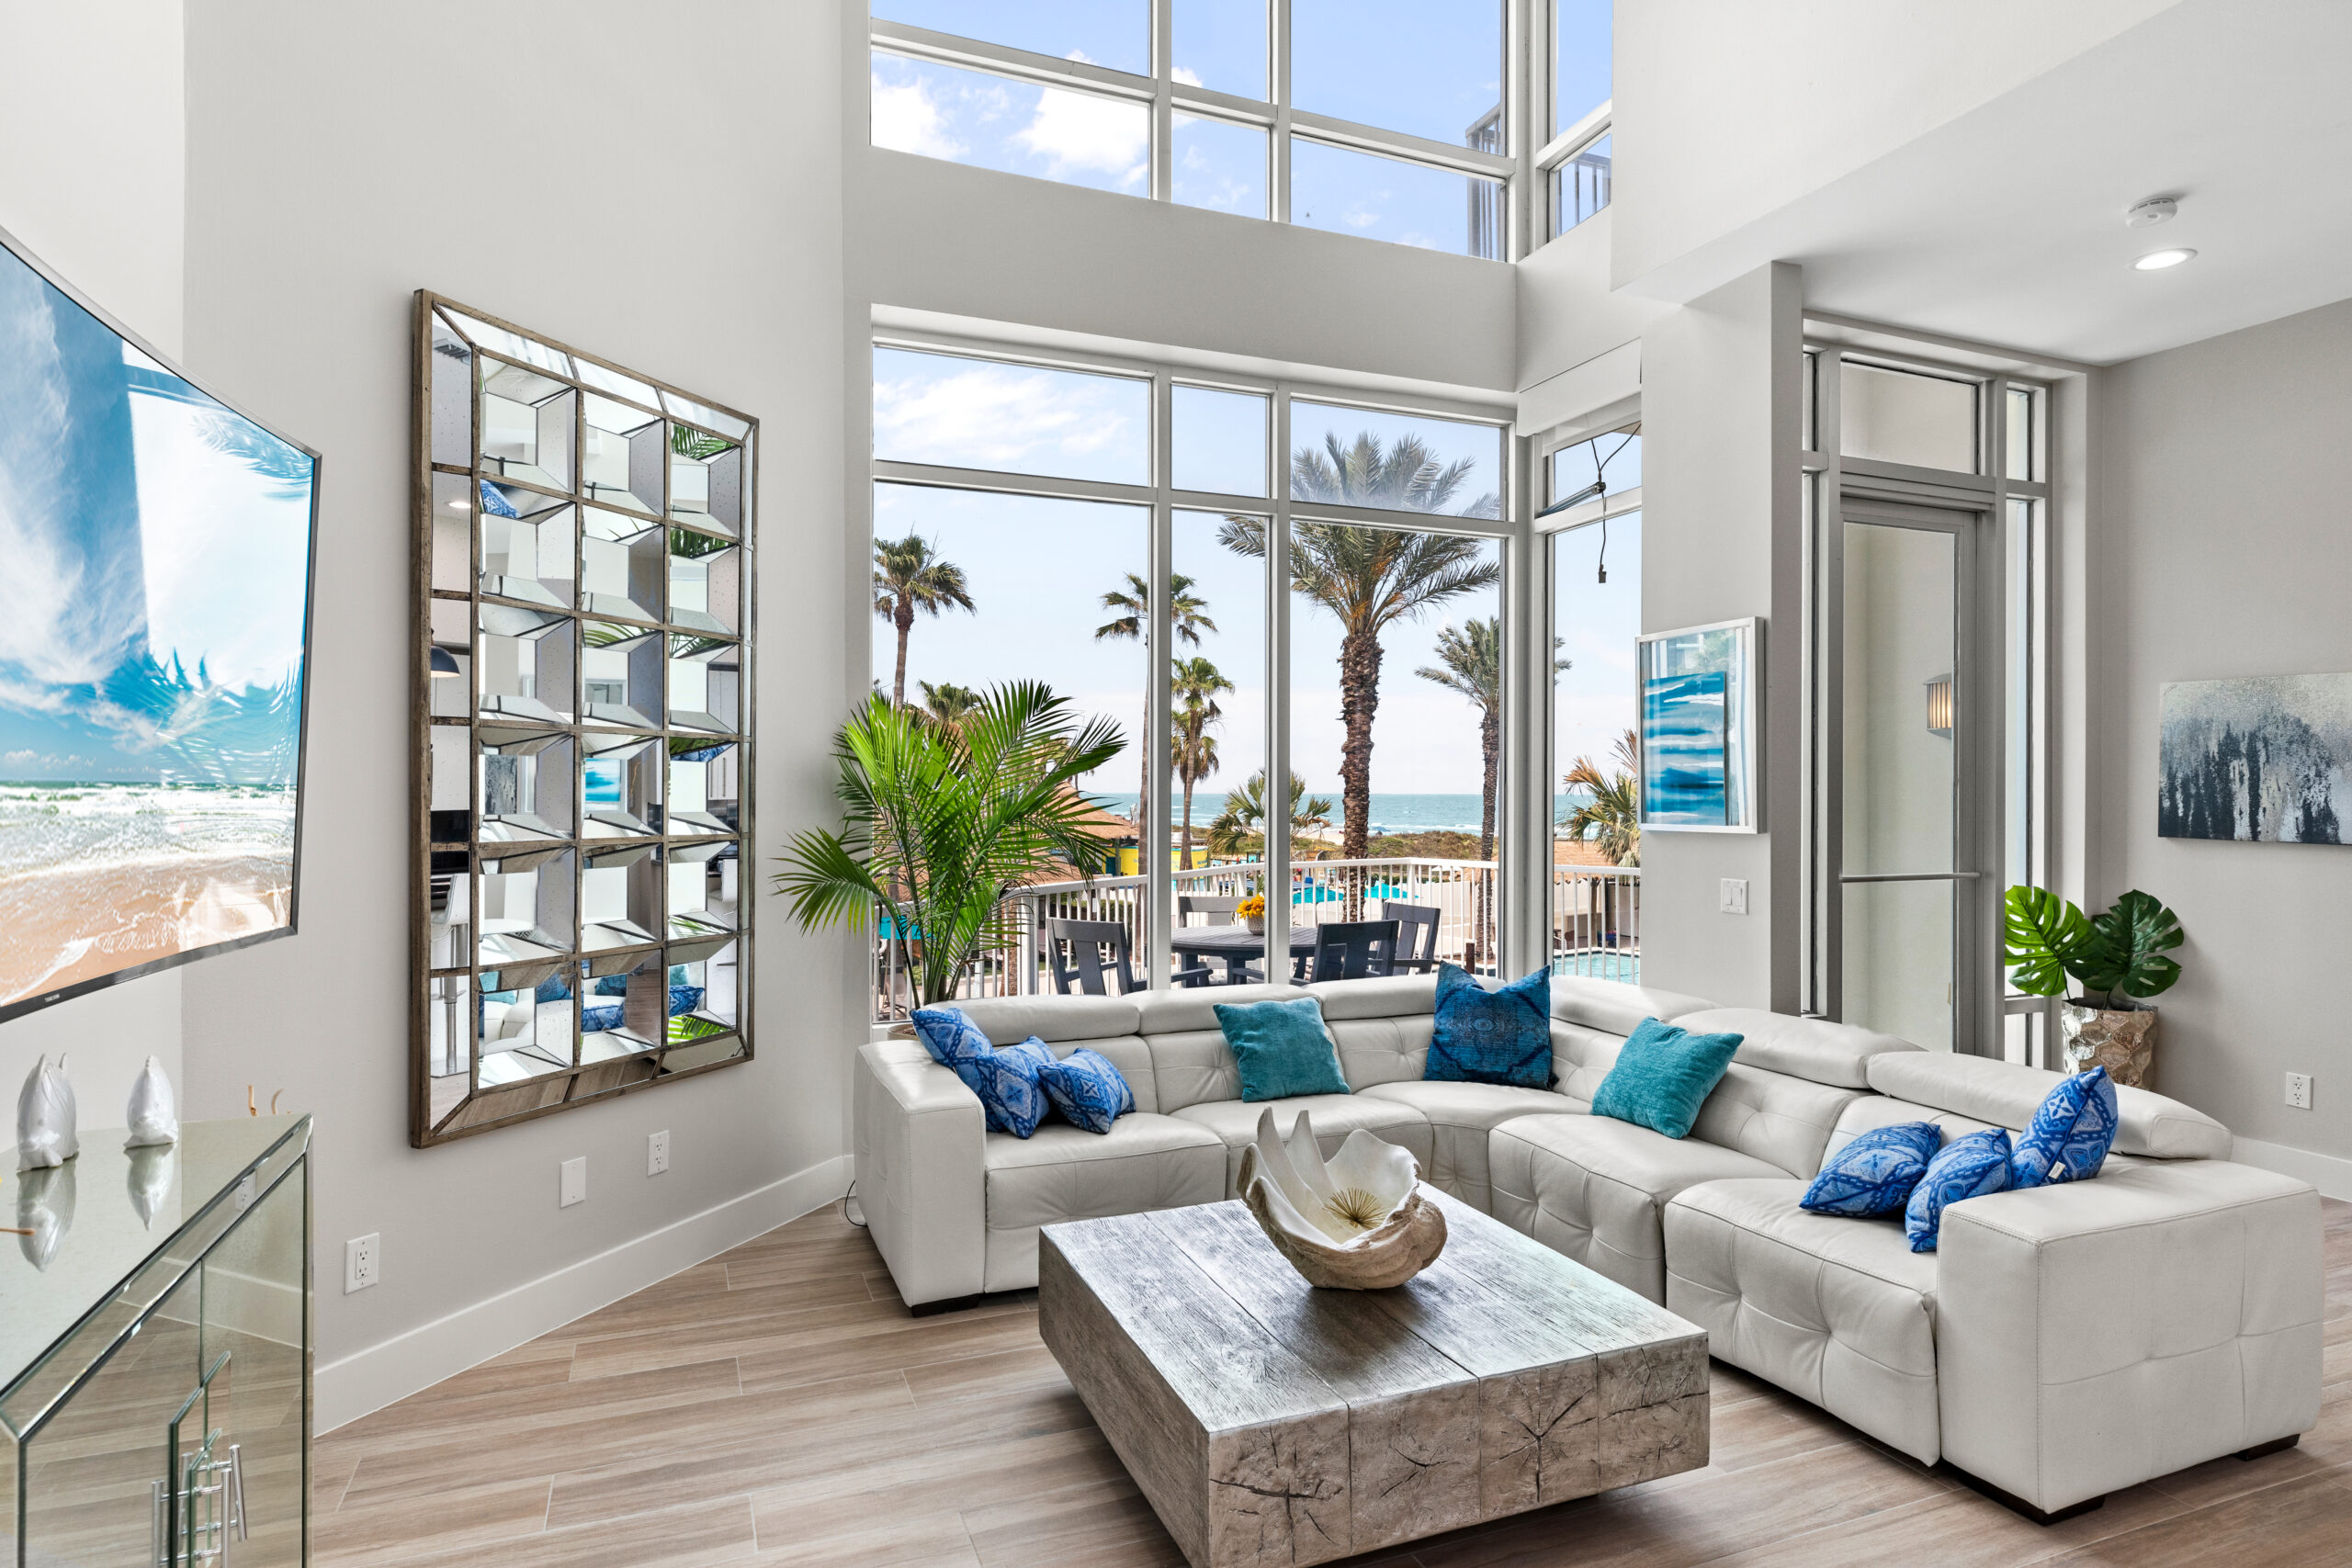 Featured image for “JUST LISTED- The Sapphire Bungalow #108, South Padre Island, TX”